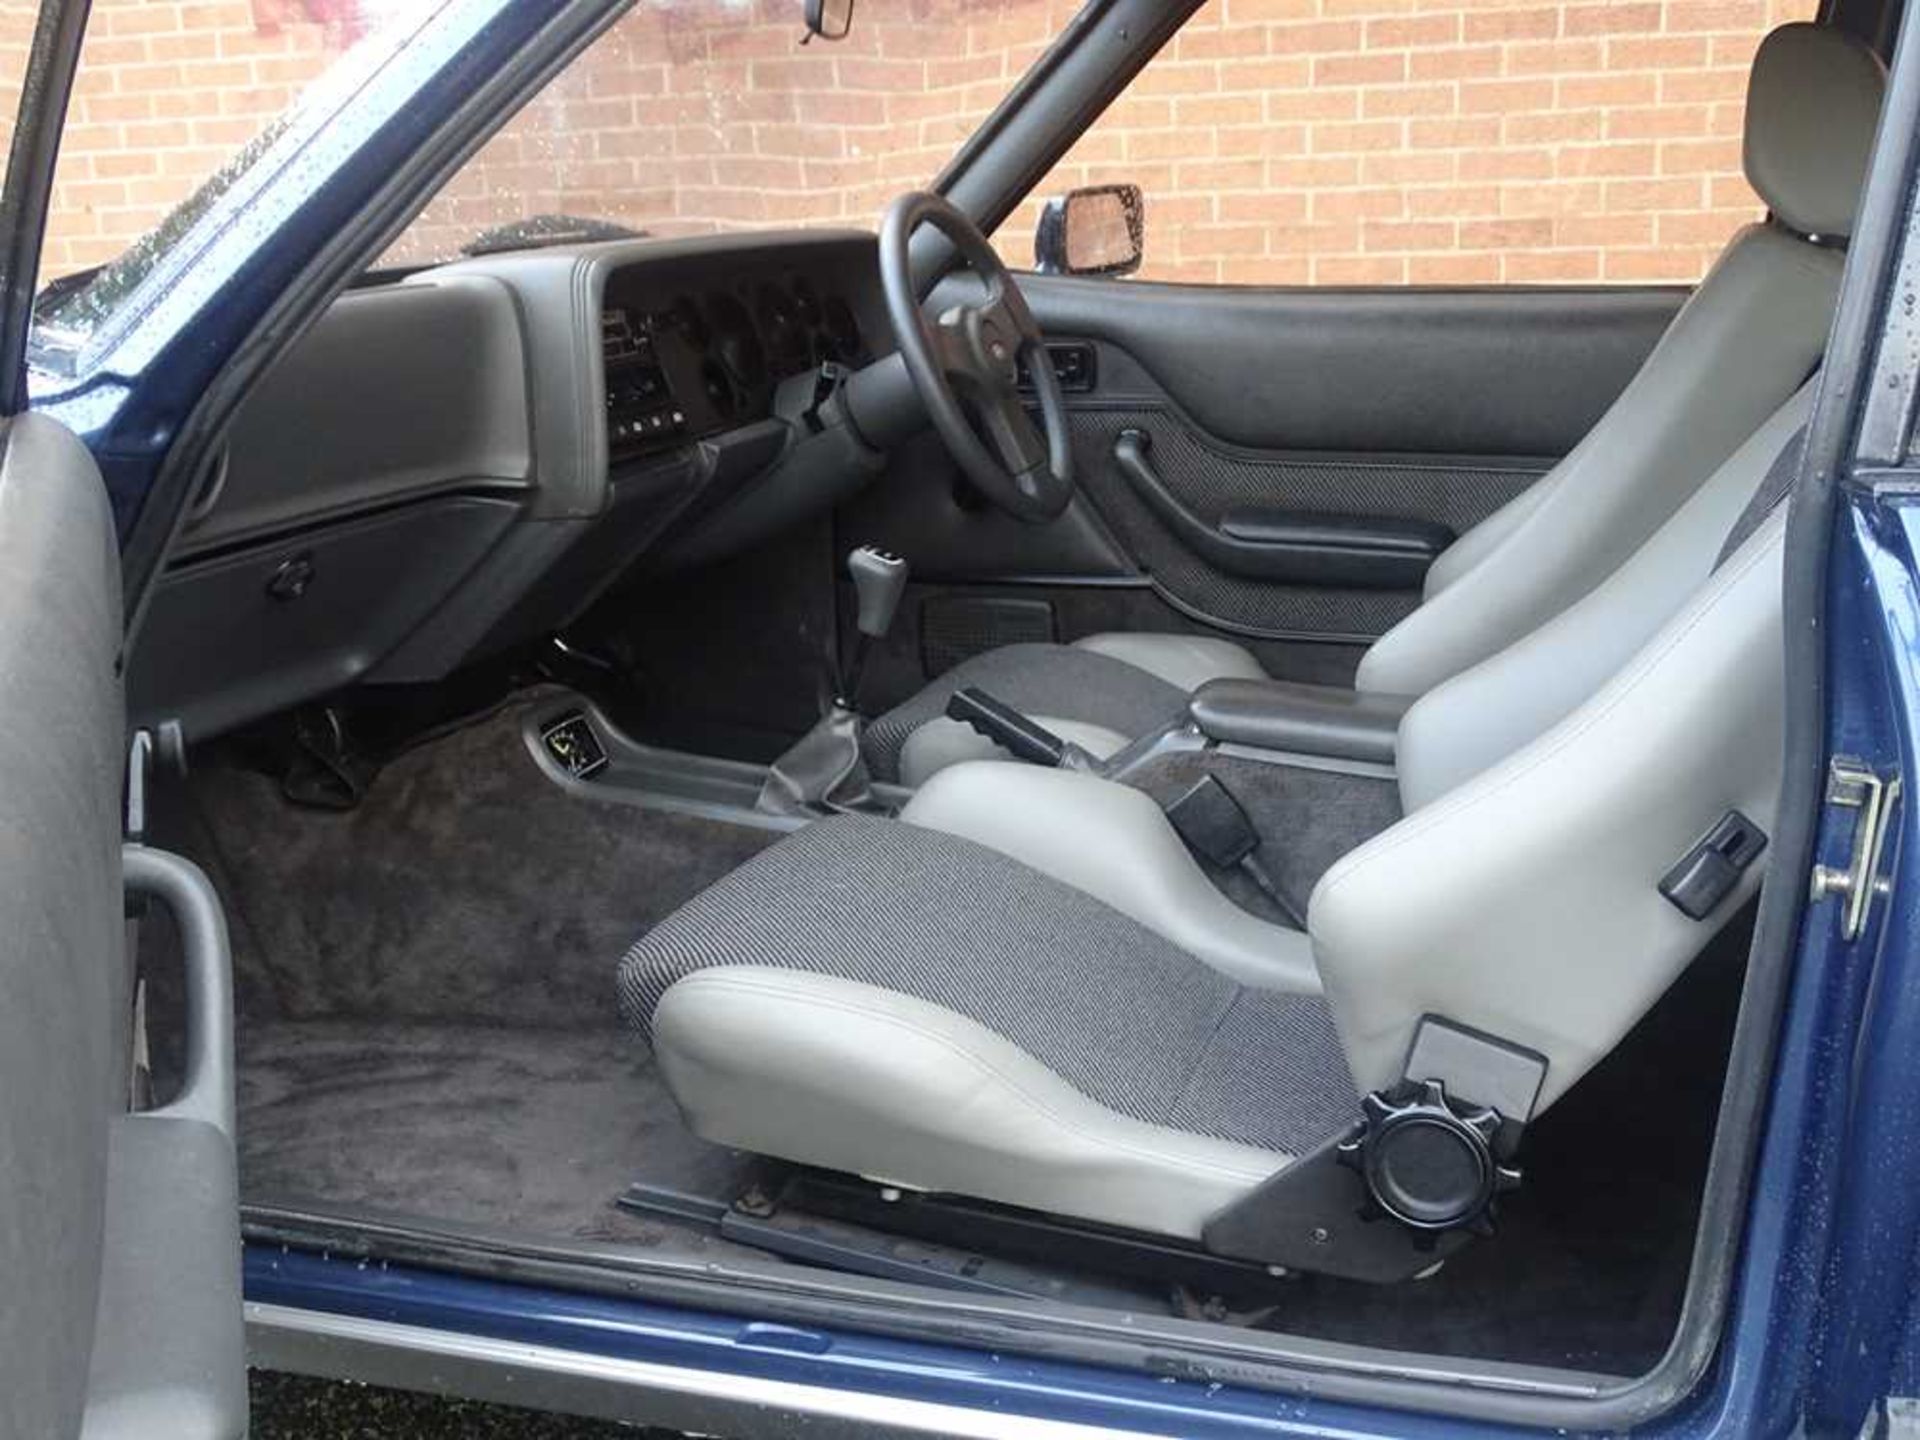 1986 Ford Capri 2.8i Special Three owners from new and warranted c.73,000 miles - Image 51 of 72